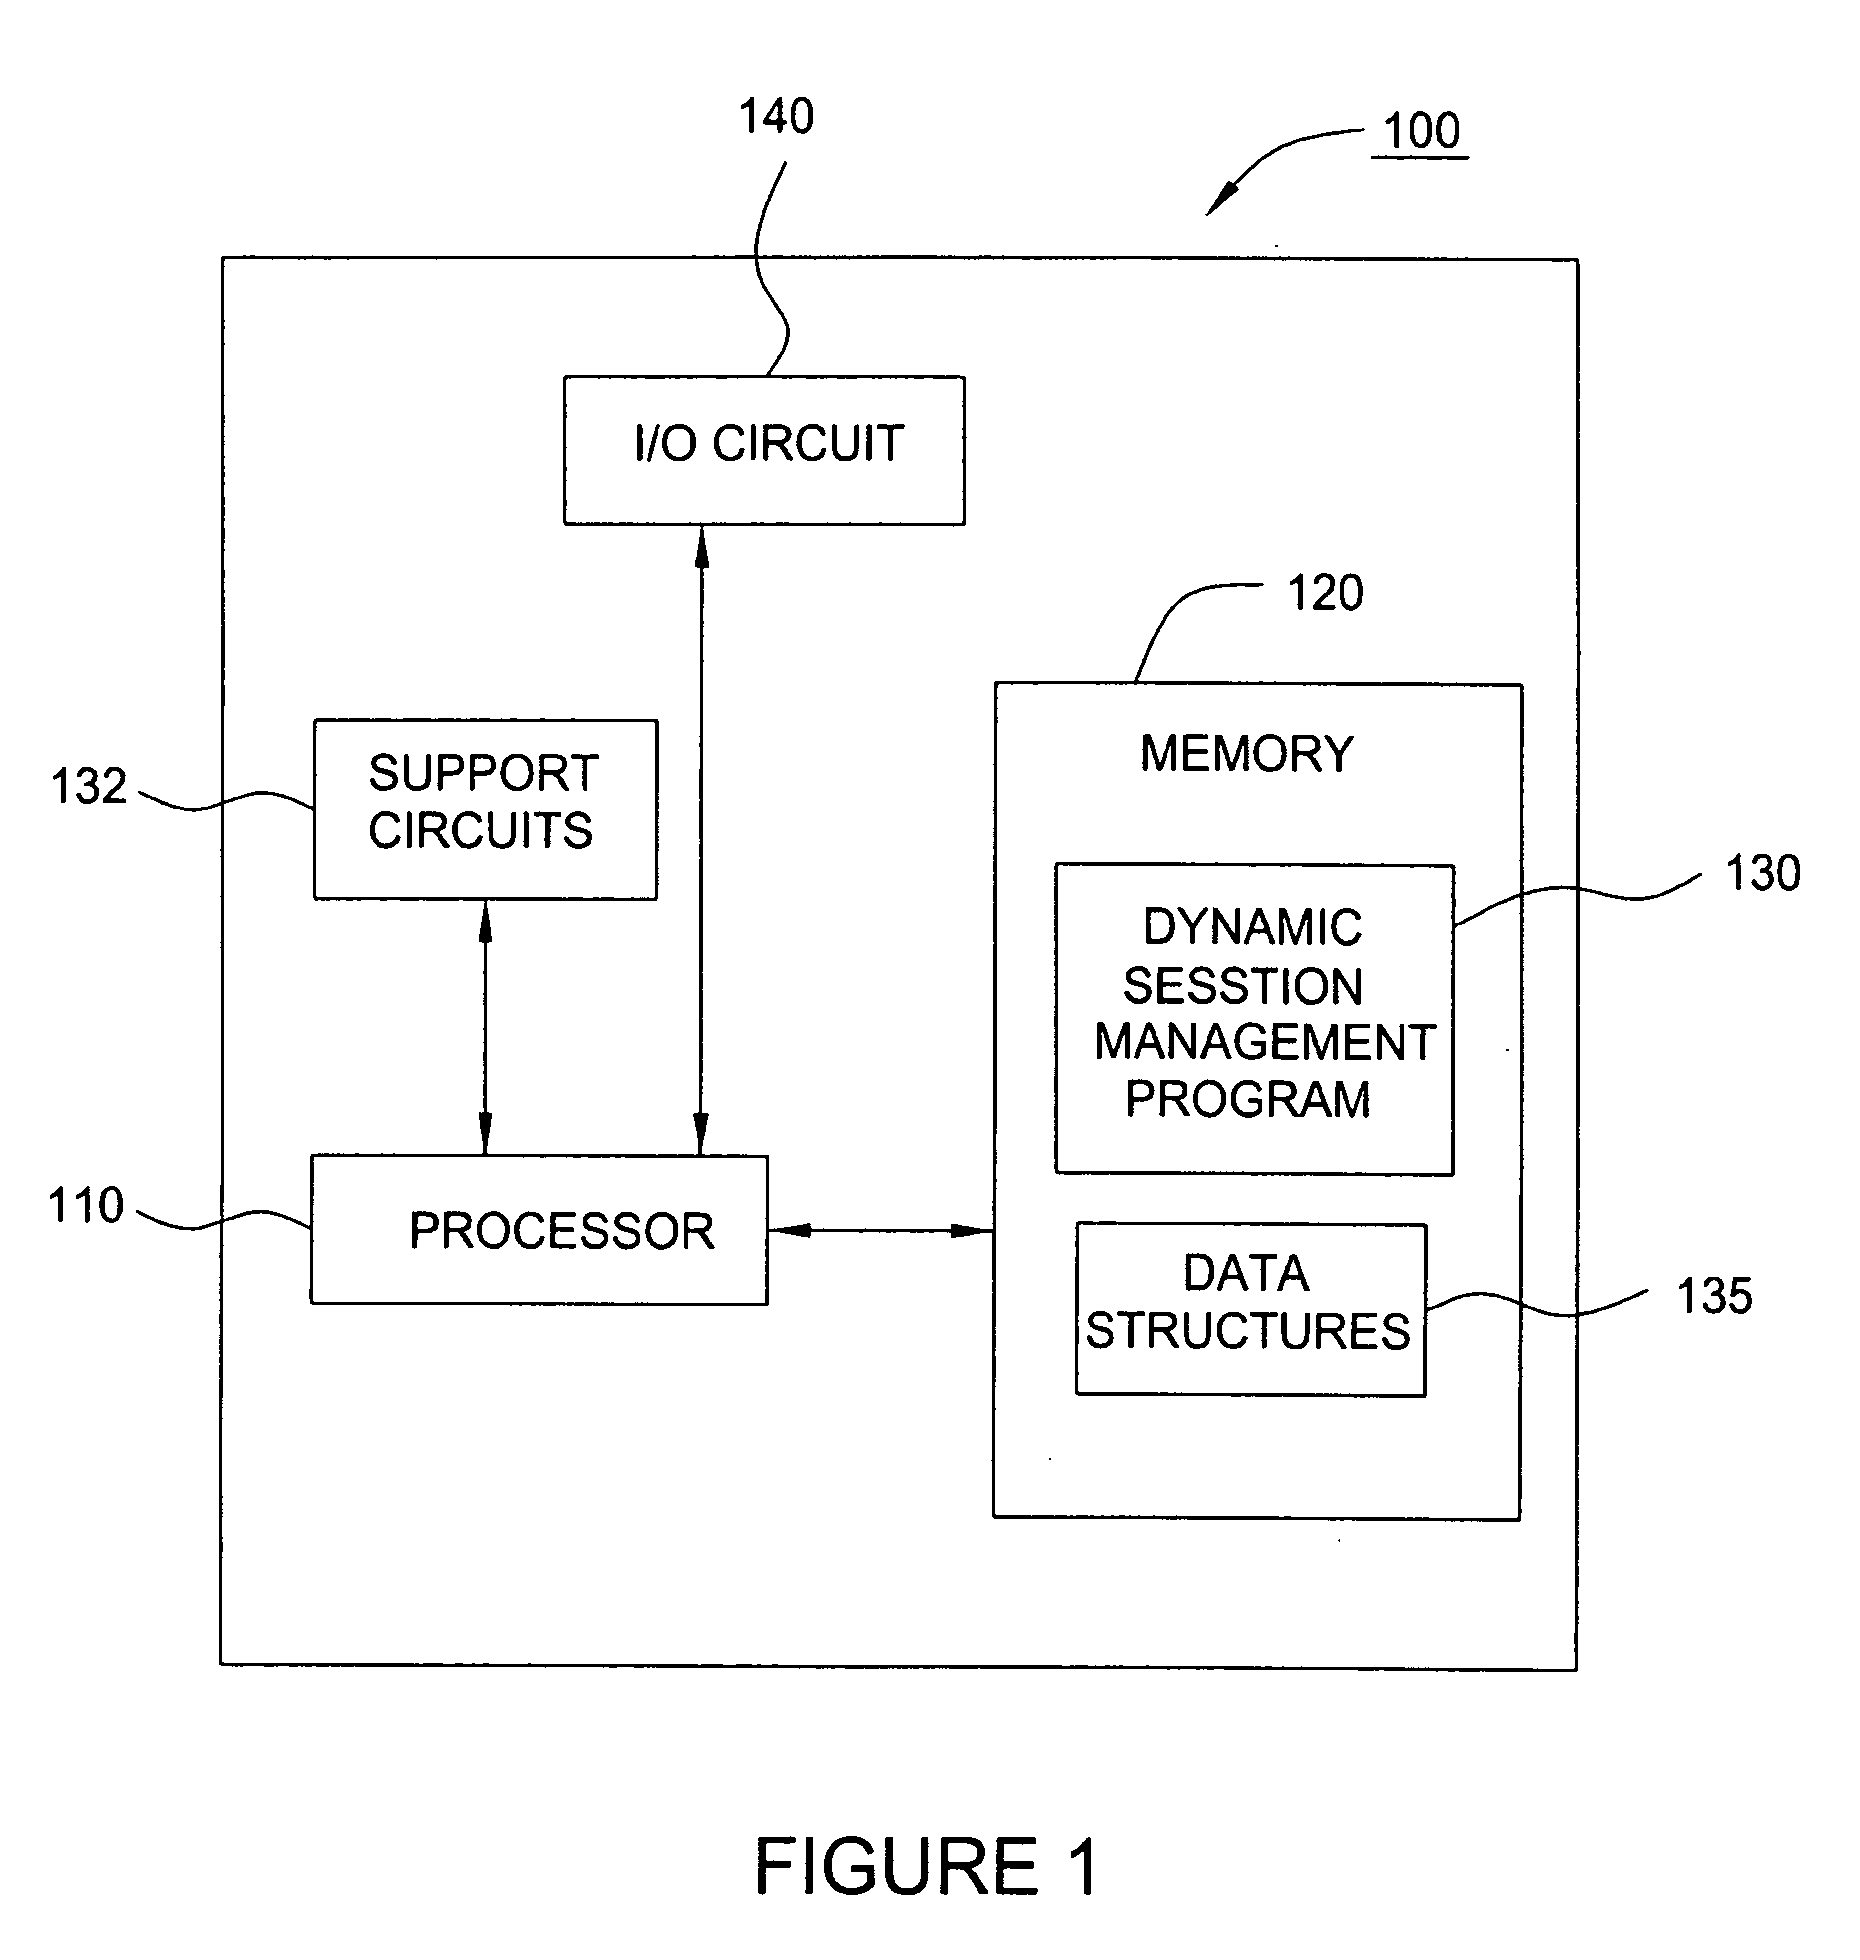 Method and apparatus for providing dynamic group management for distributed interactive applications